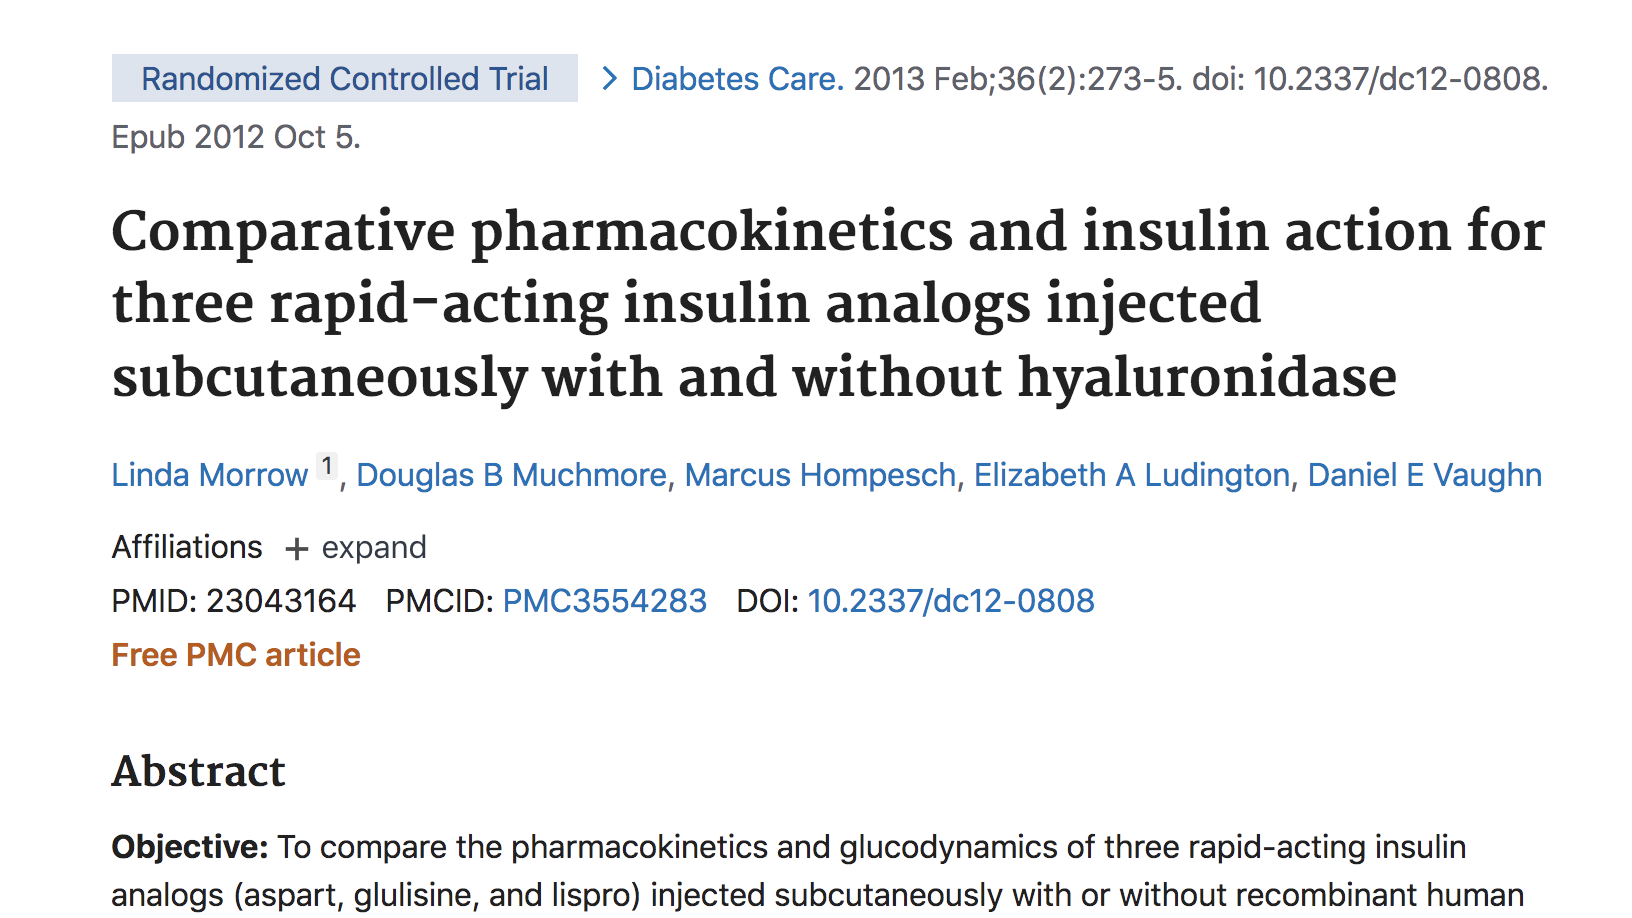 image of Comparative pharmacokinetics and insulin action for three rapid-acting insulin analogs injected subcutaneously with and without hyaluronidase